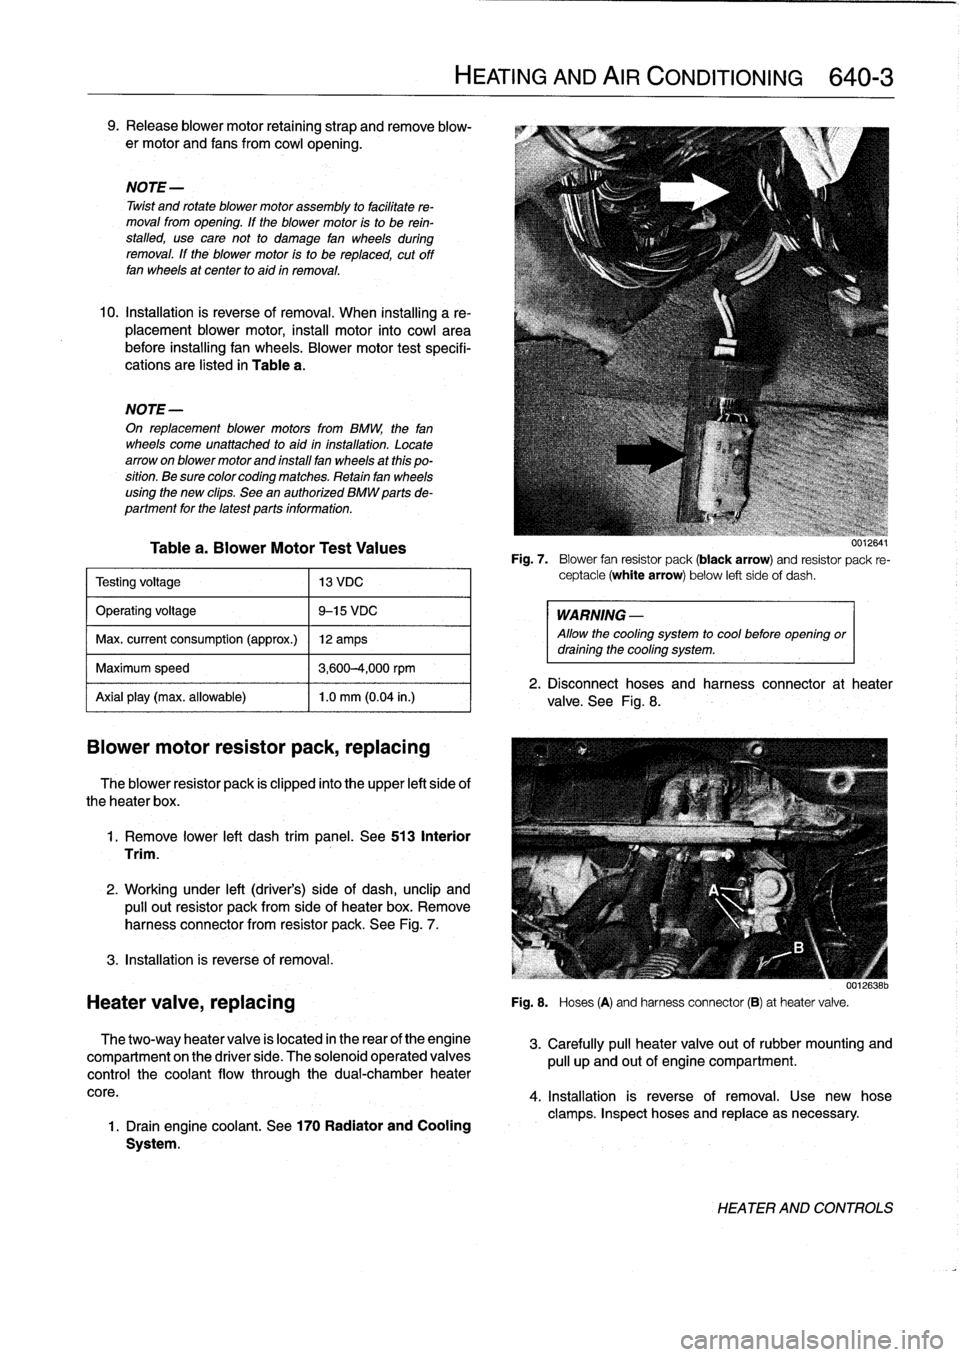 BMW 328i 1998 E36 User Guide 
9
.
Release
blower
motor
retaining
strap
andremove
blow-
er
motor
and
fans
fromcowl
opening
.

NOTE-

Twist
and
rotate
blowermotor
assembly
to
facilítate
re-
moval
from
opening
.
If
the
blower
motor